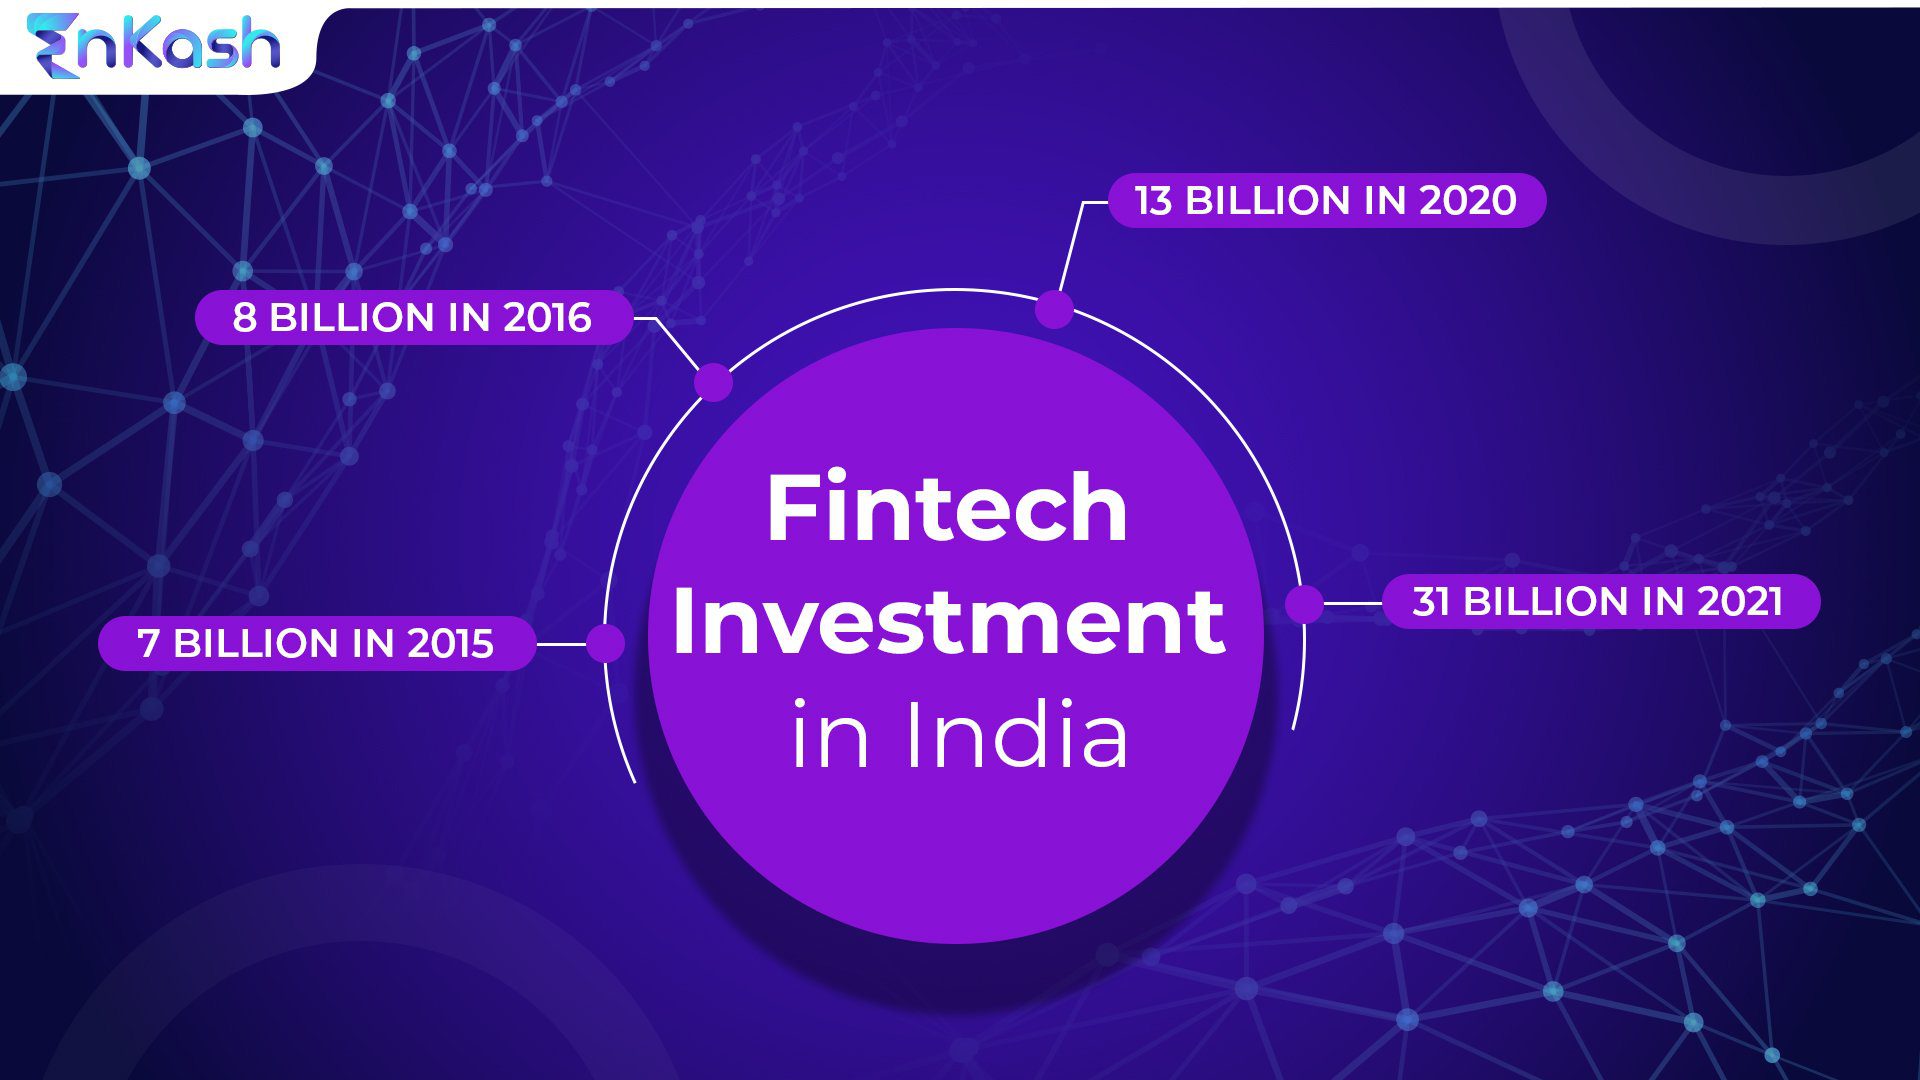 Fintech investment in India